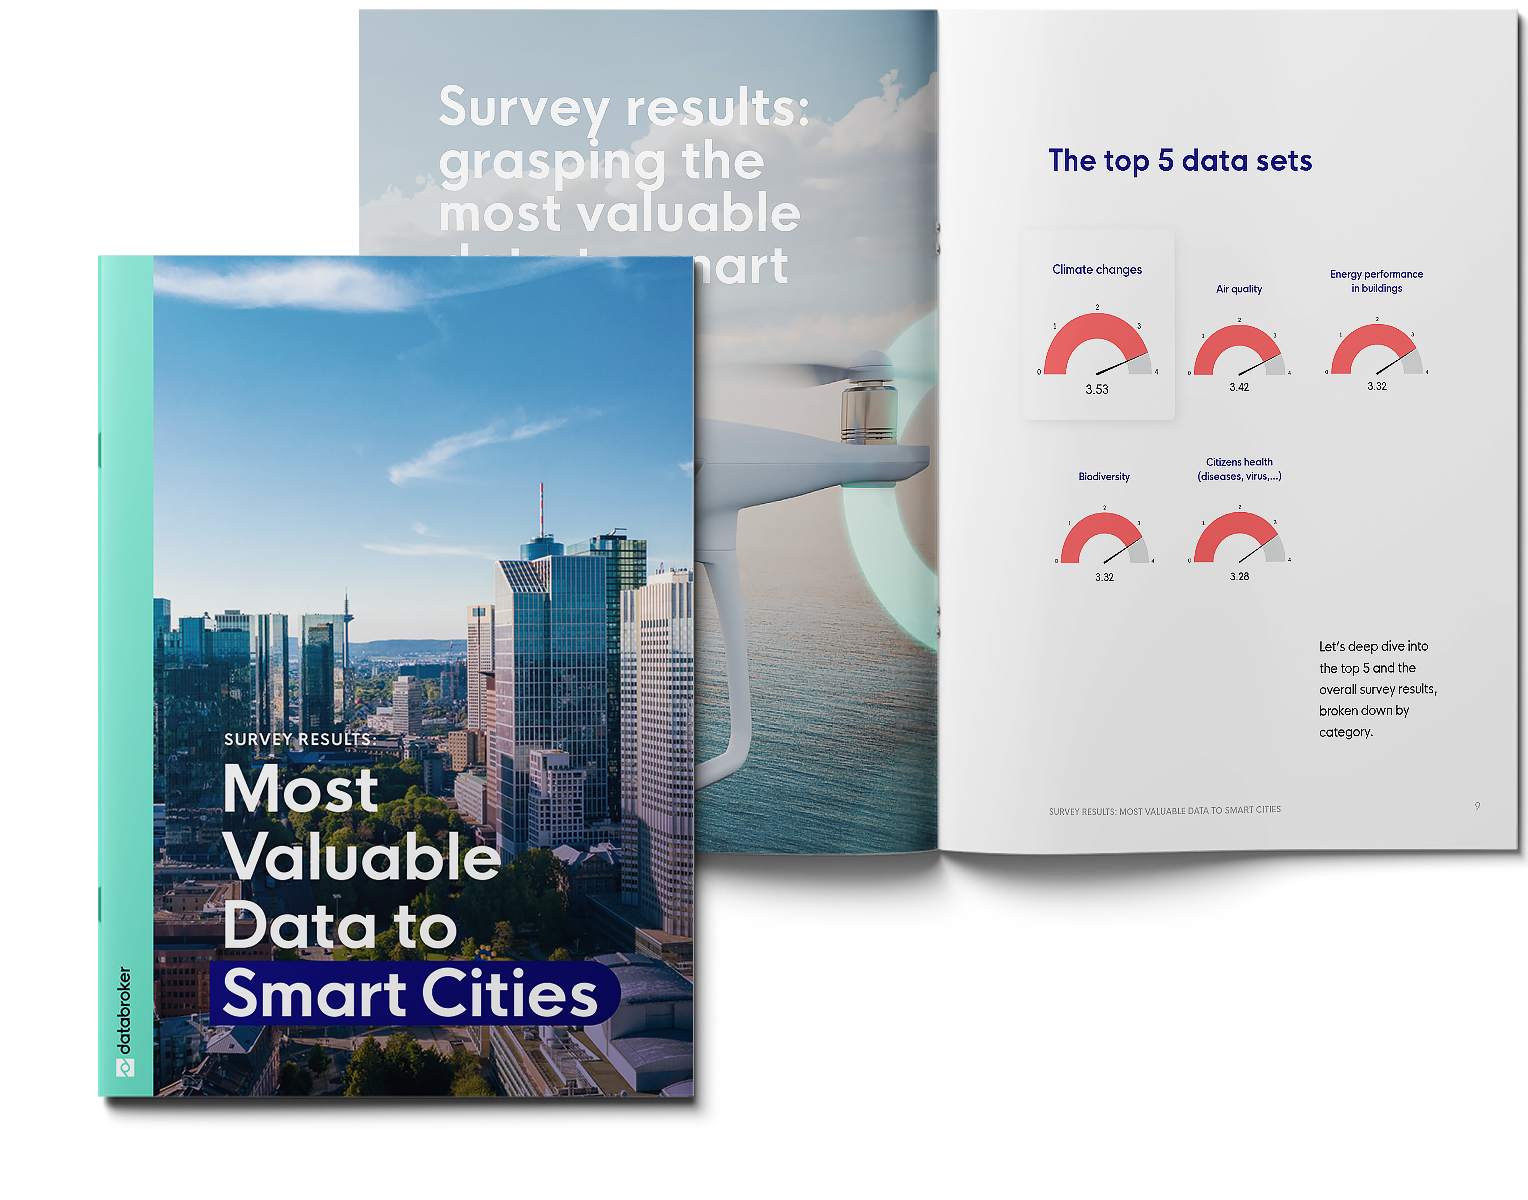 Survey results: the most valuable data to smart cities